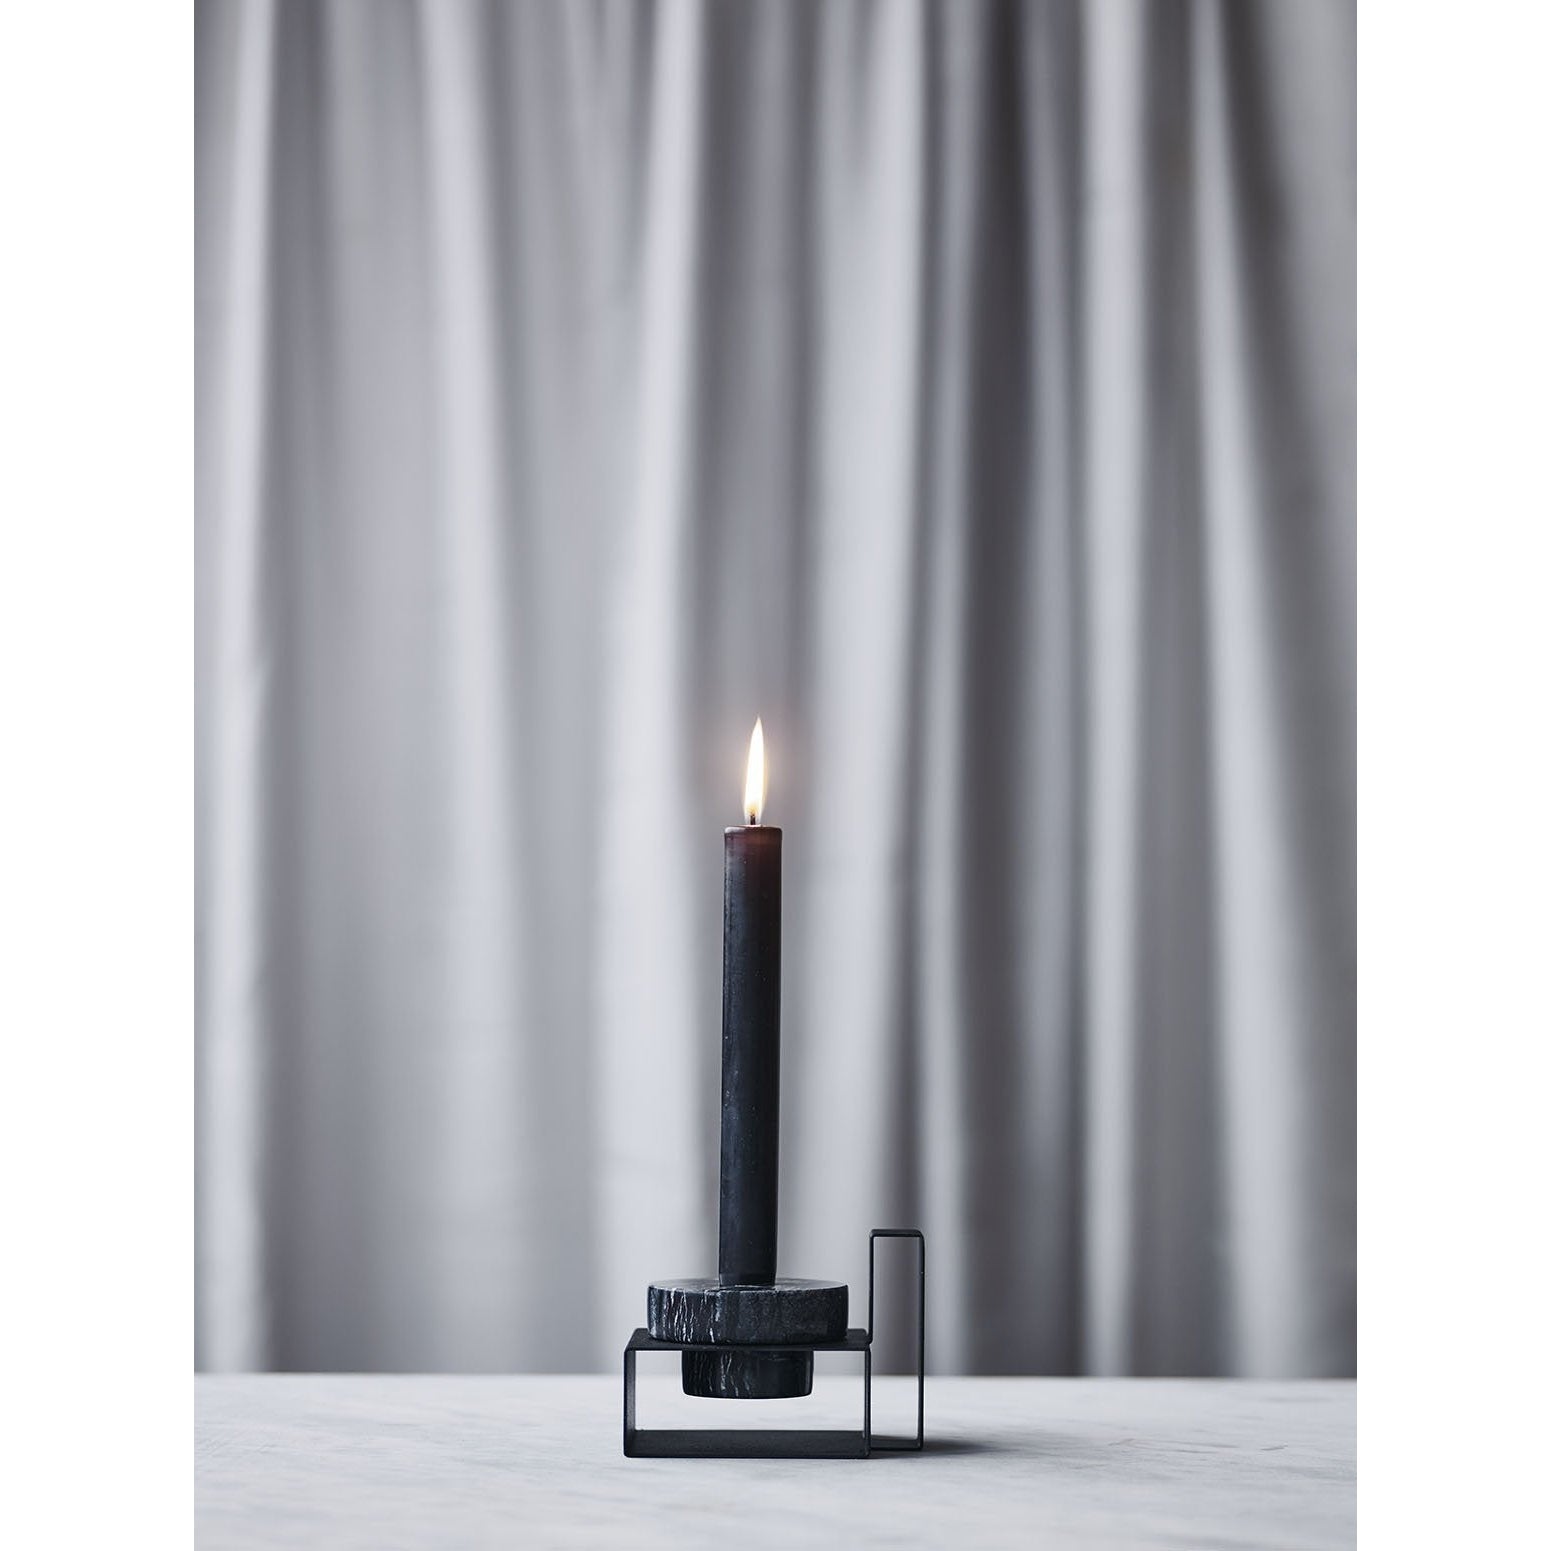 Lucie Kaas Marco Candlestick White，8厘米